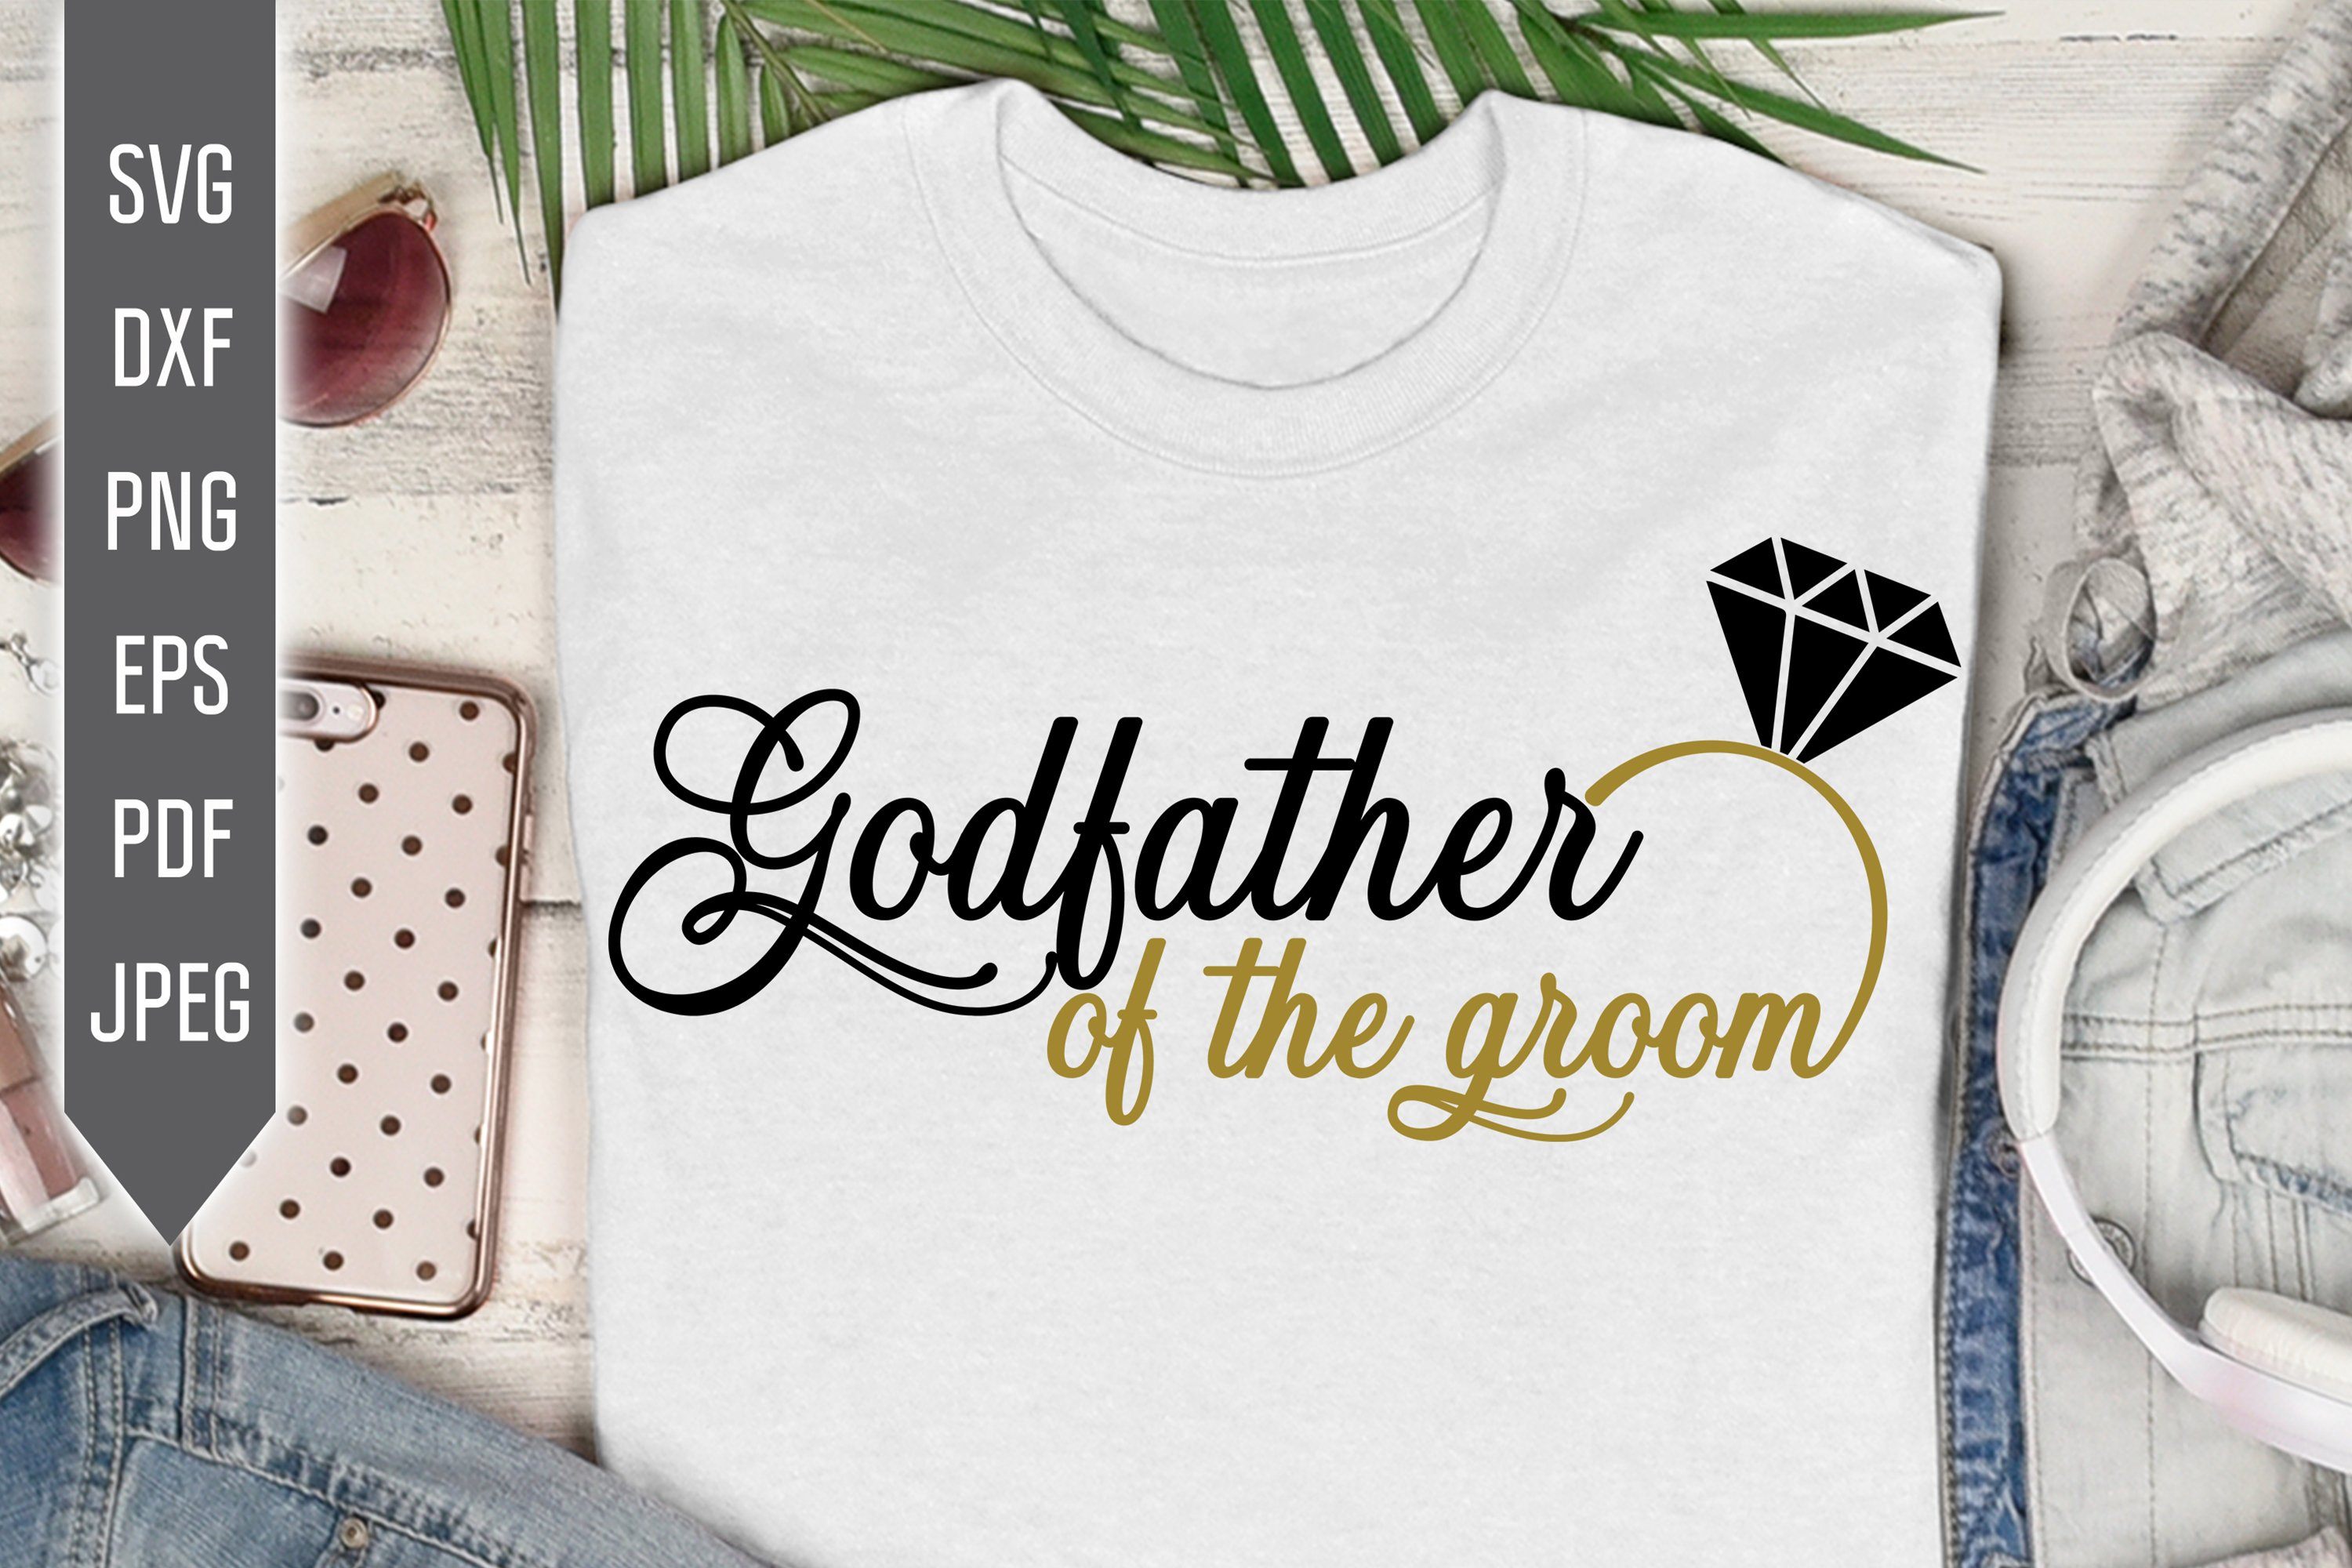 Download Godfather Of The Groom Svg Wedding Svg Bride Team Svg Wedding Roles Svg Wedding Party Svg Cricut Silhouette Iron On Dxf Eps Png So Fontsy